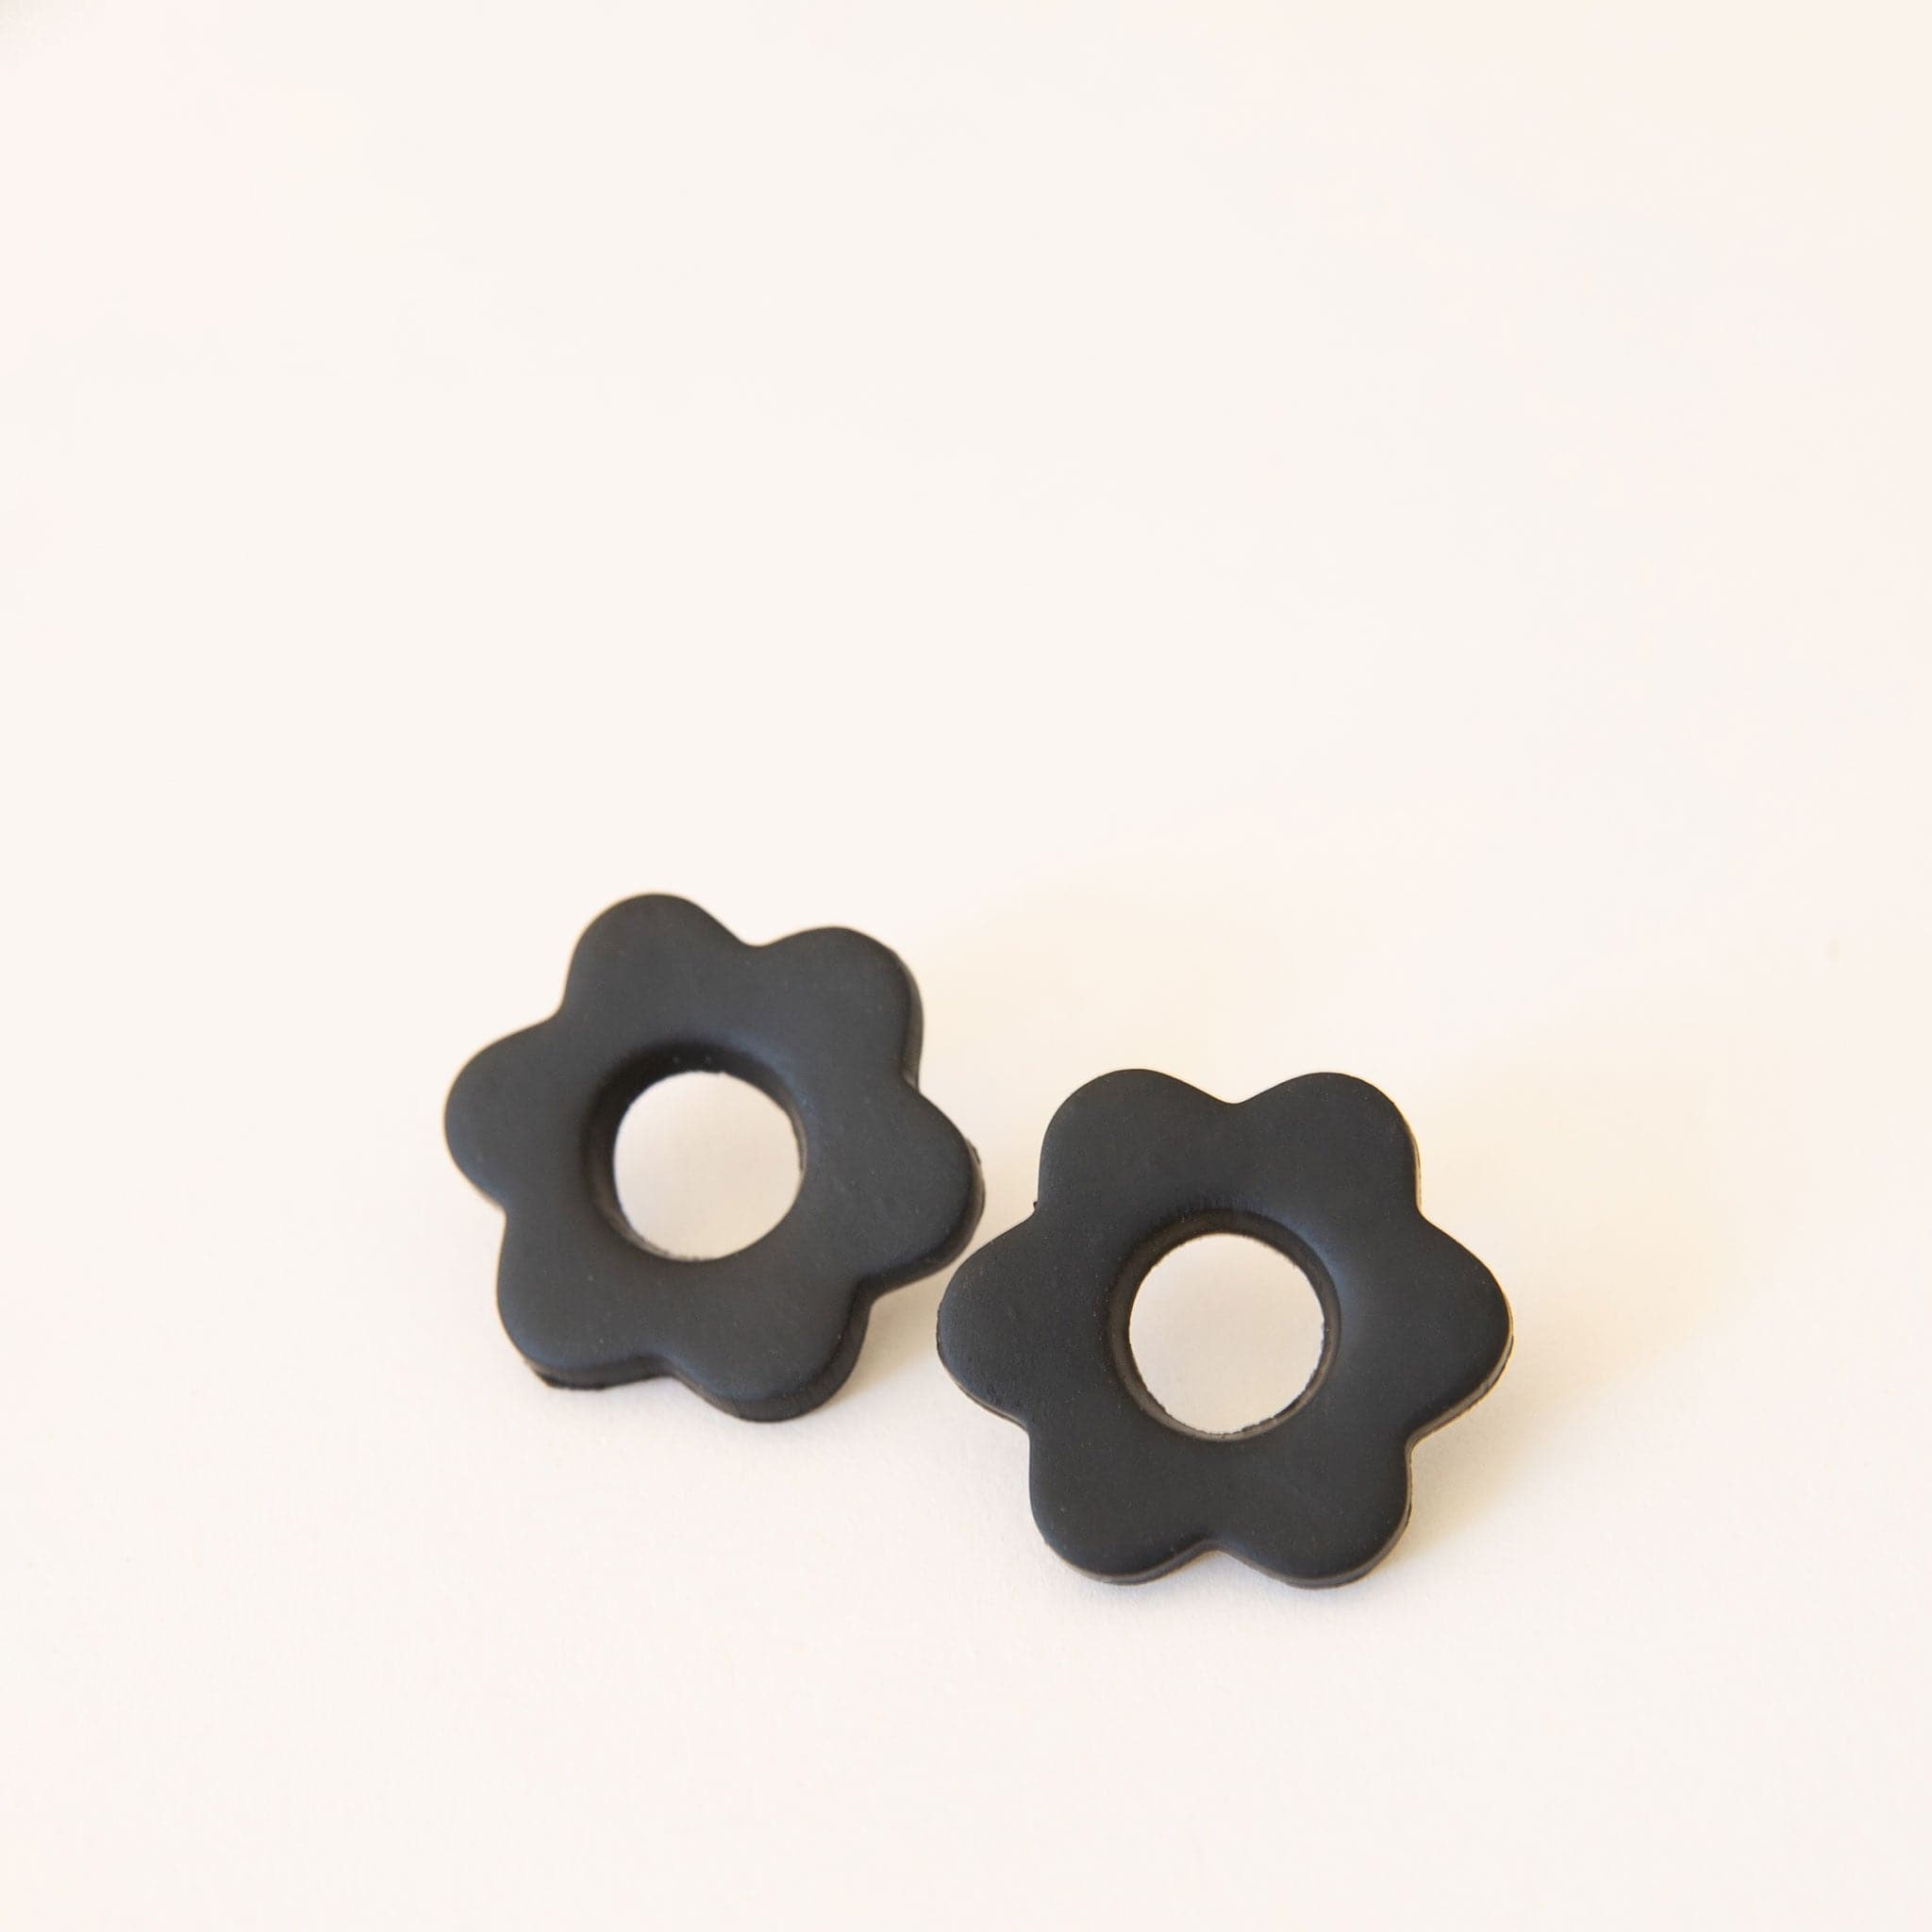 Pair of two solid black flower earrings. Each flower has a hole in its center and is made of polymer clay. 